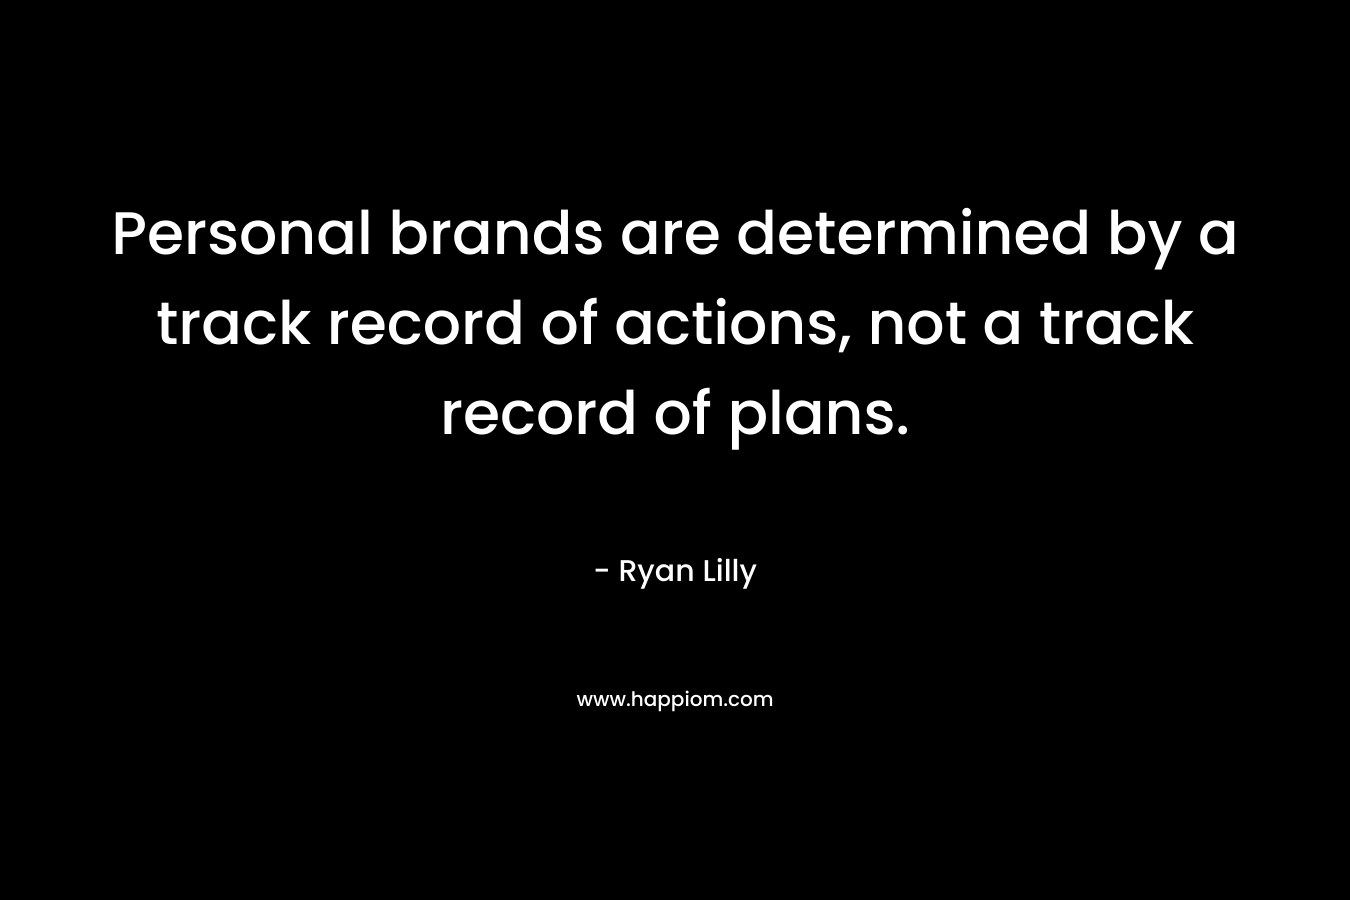 Personal brands are determined by a track record of actions, not a track record of plans.